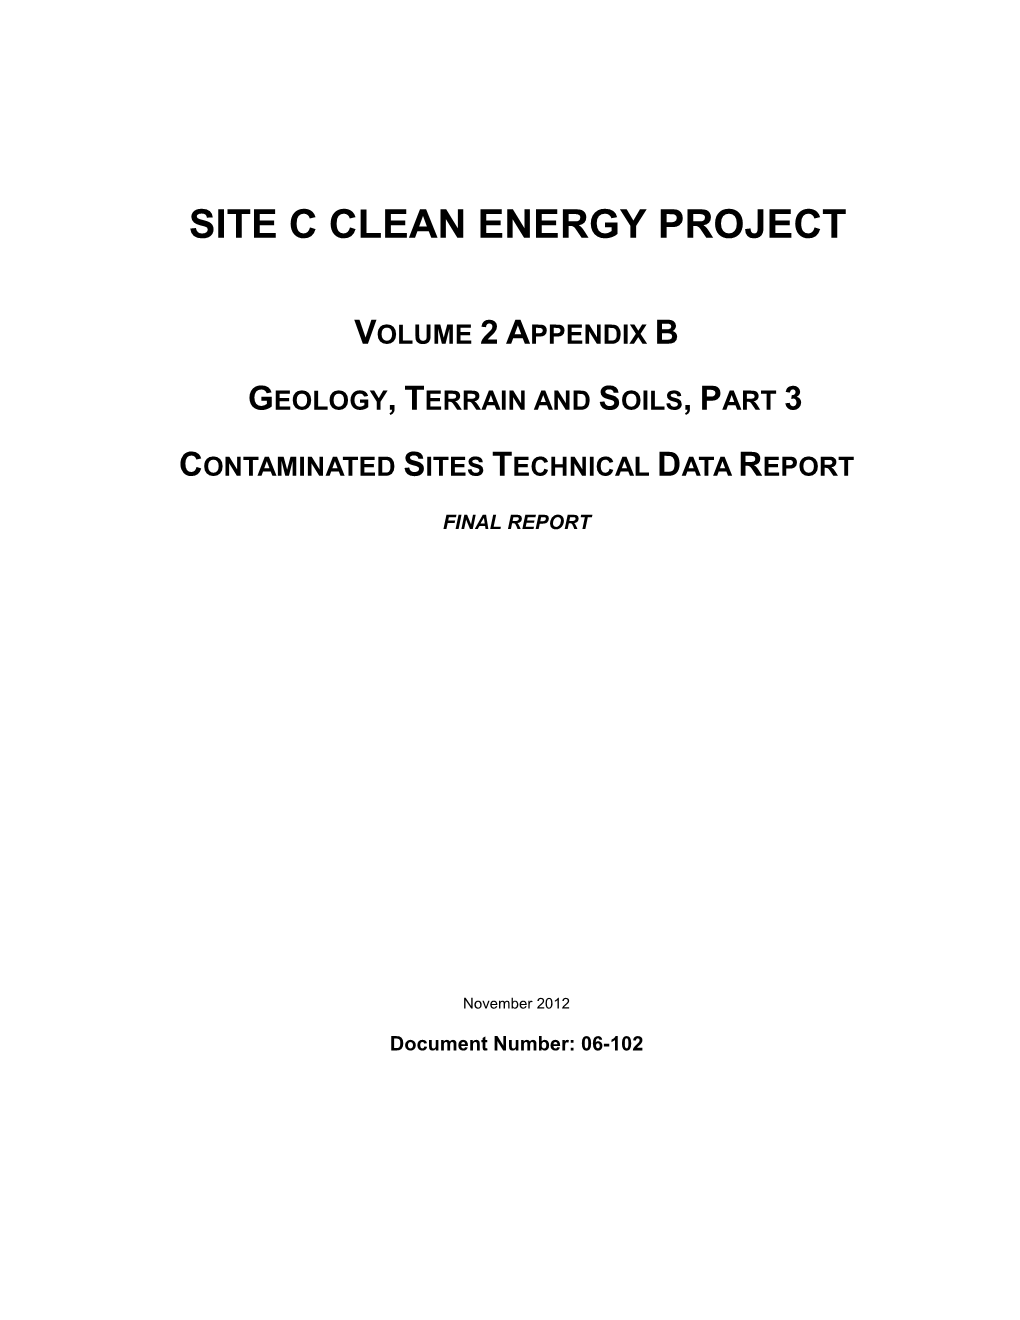 Site C Clean Energy Project: Technical Data Report